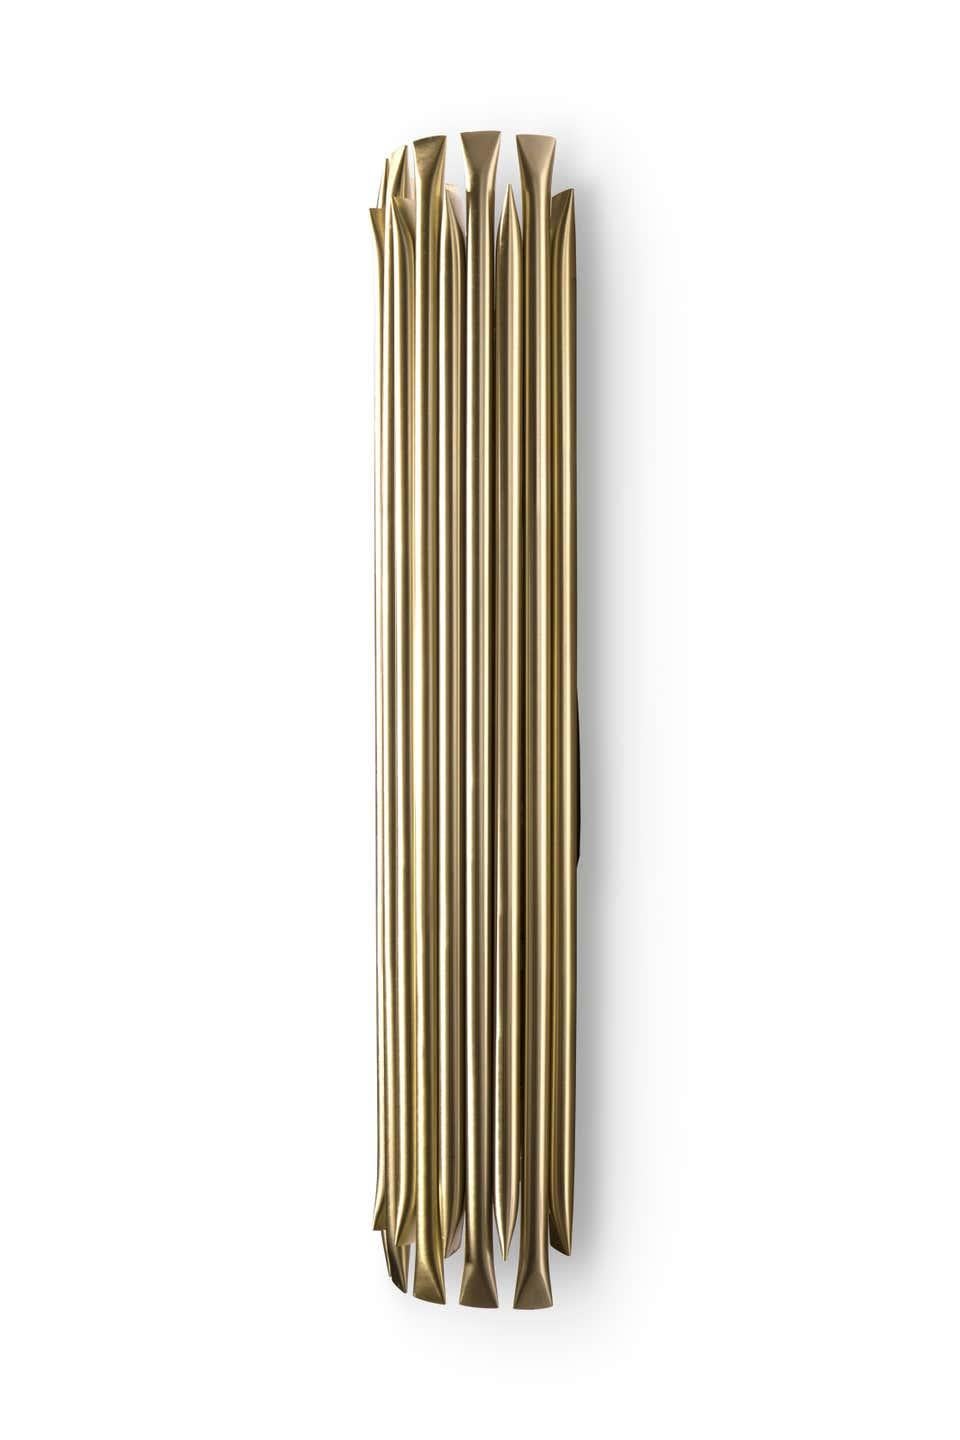 European Large Wall Light in Brass with Brushed Nickel Finish For Sale